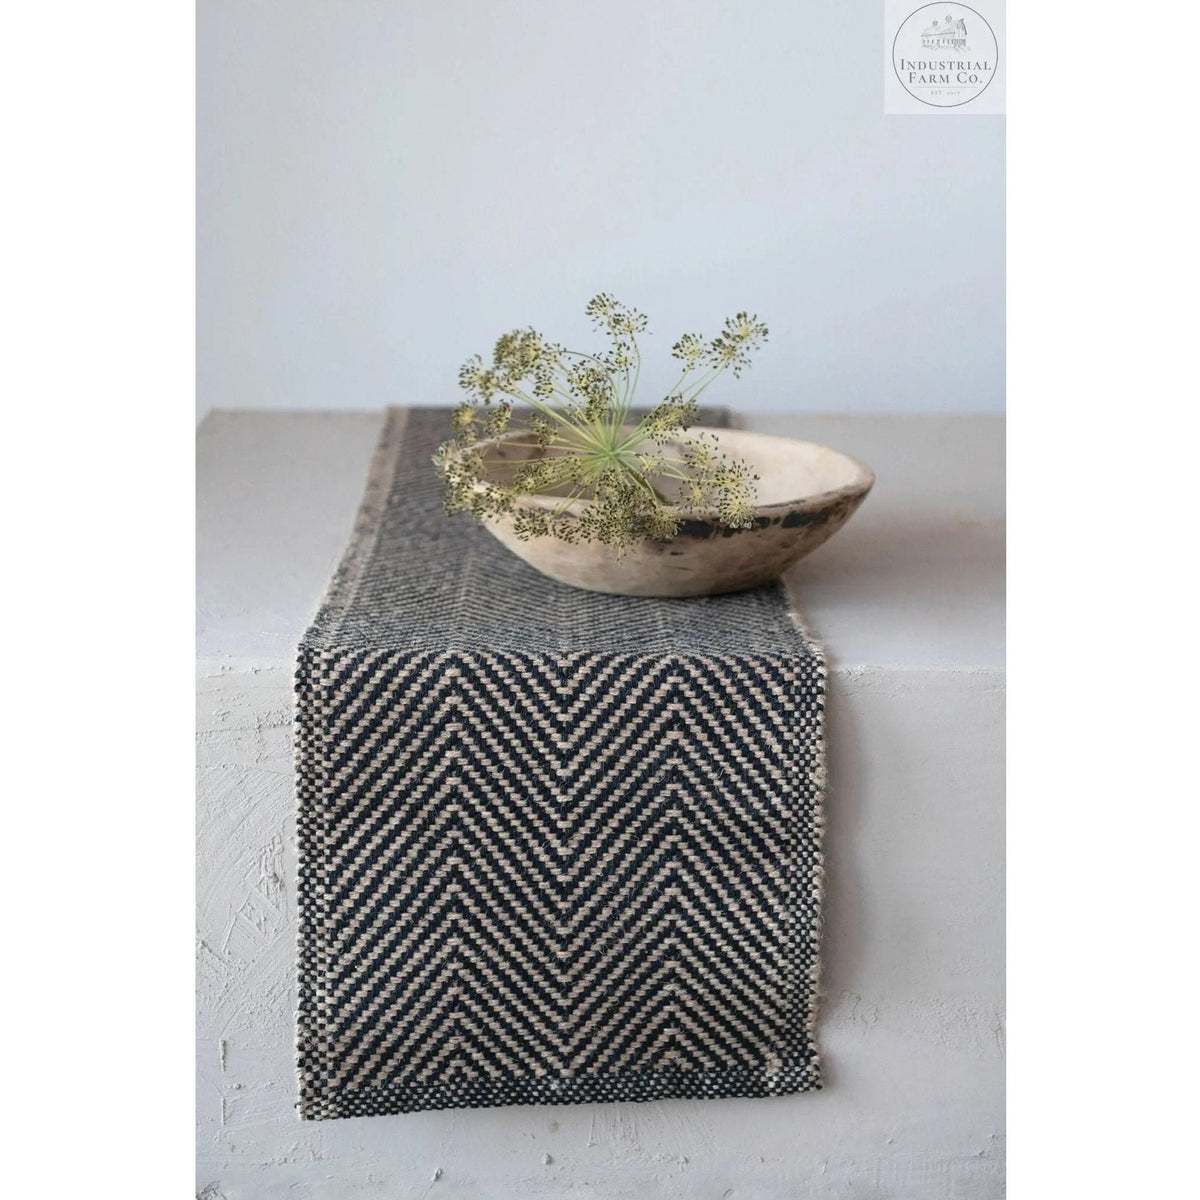 Gather Around Jute Table Runner  Default Title   | Industrial Farm Co